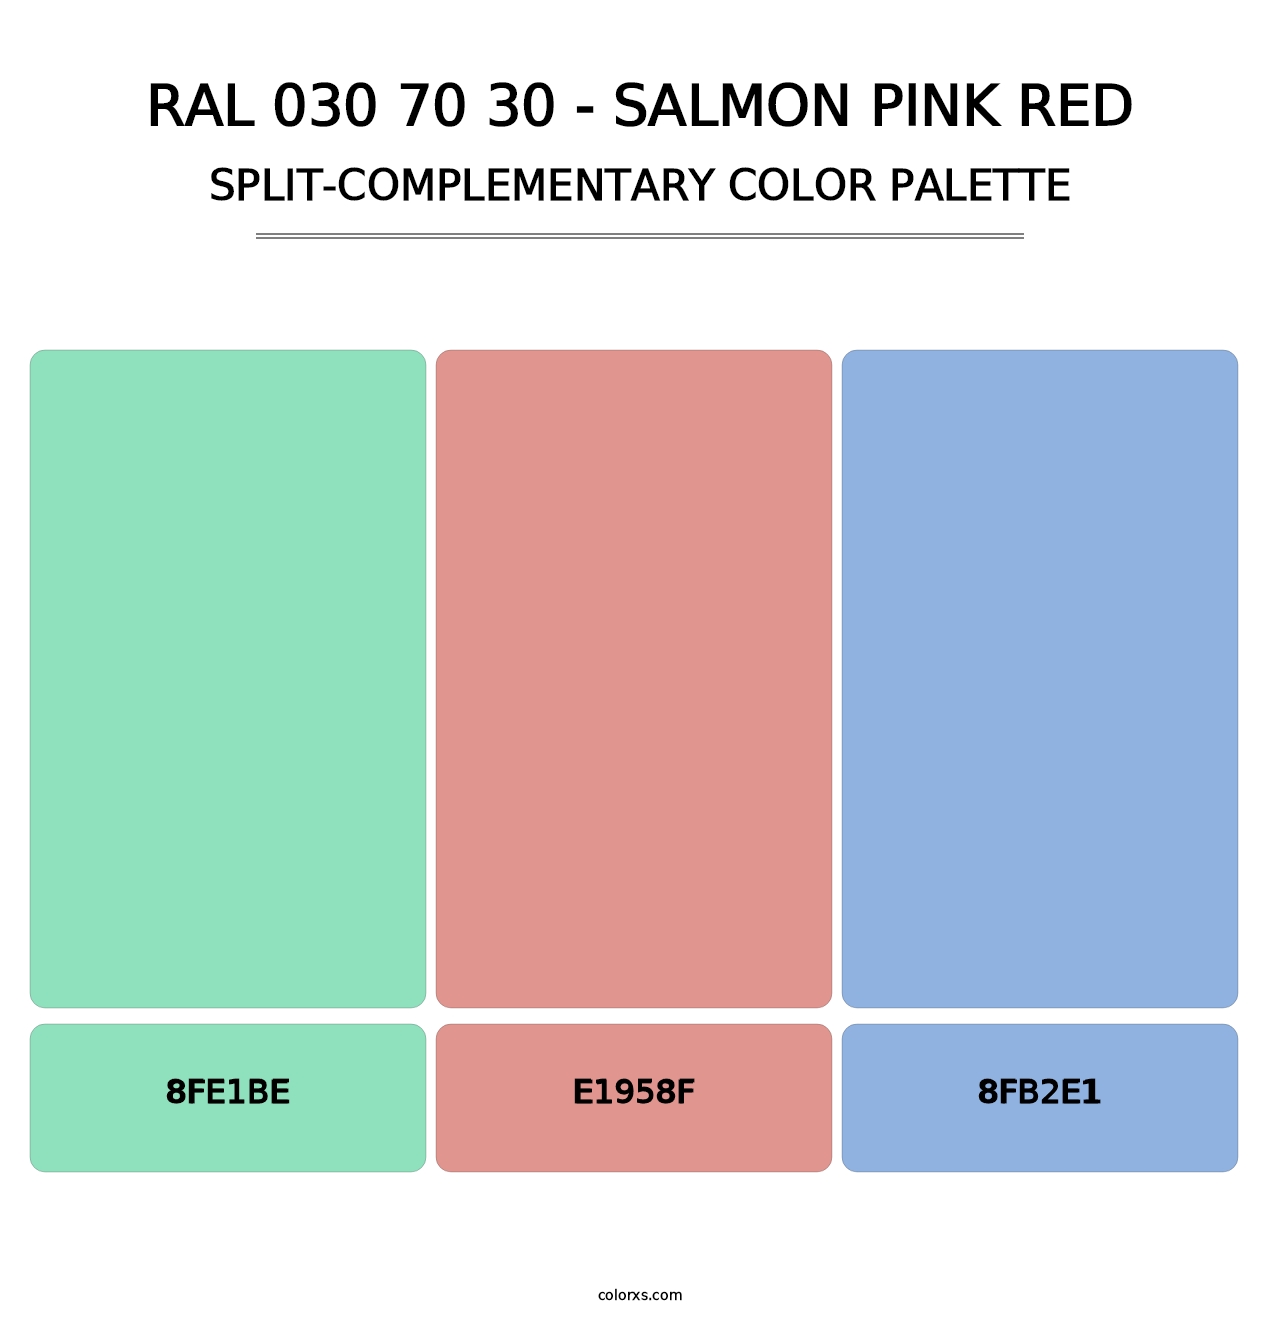 RAL 030 70 30 - Salmon Pink Red - Split-Complementary Color Palette